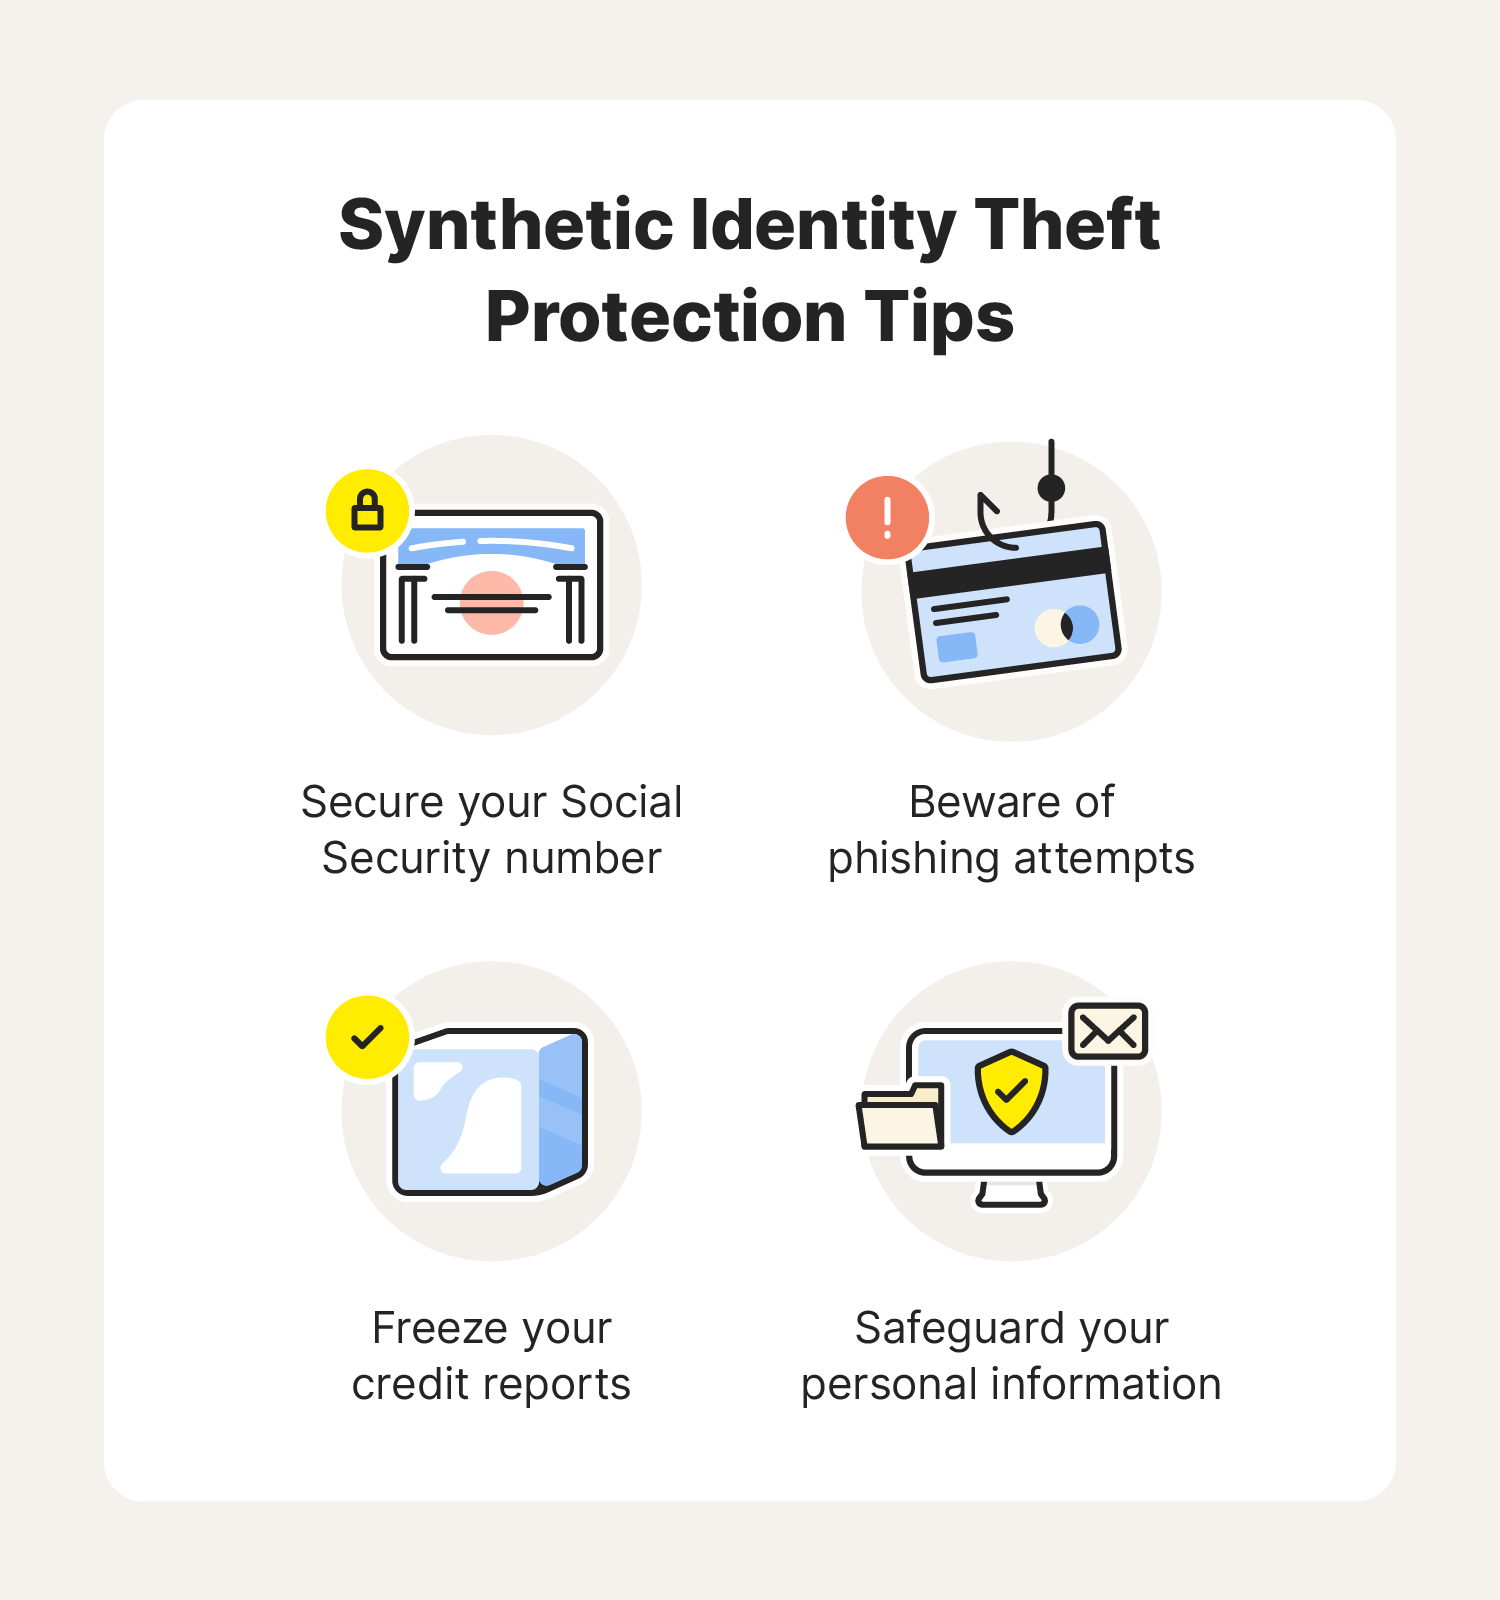 A graphic displays synthetic identity theft protection tips.